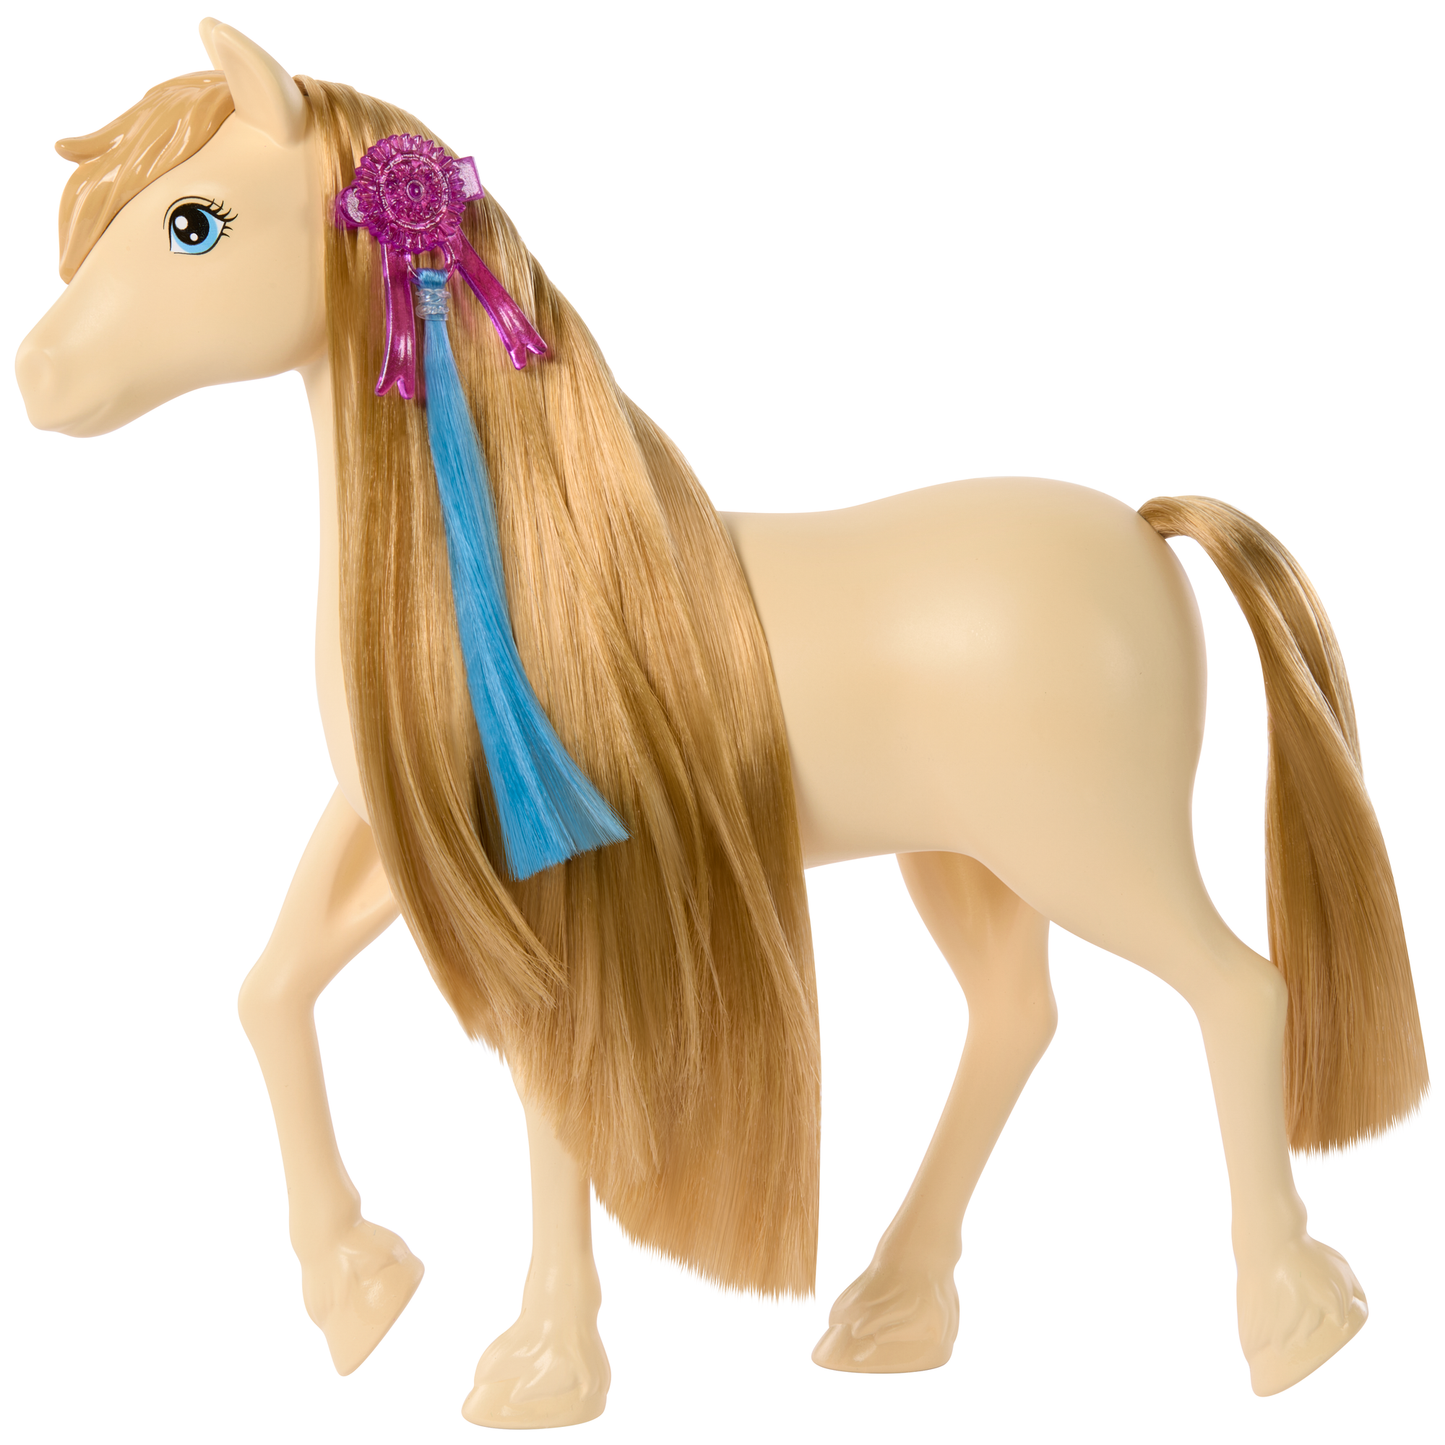 Barbie Mysteries The Great Horse Chase Tornado Pony and Accessories